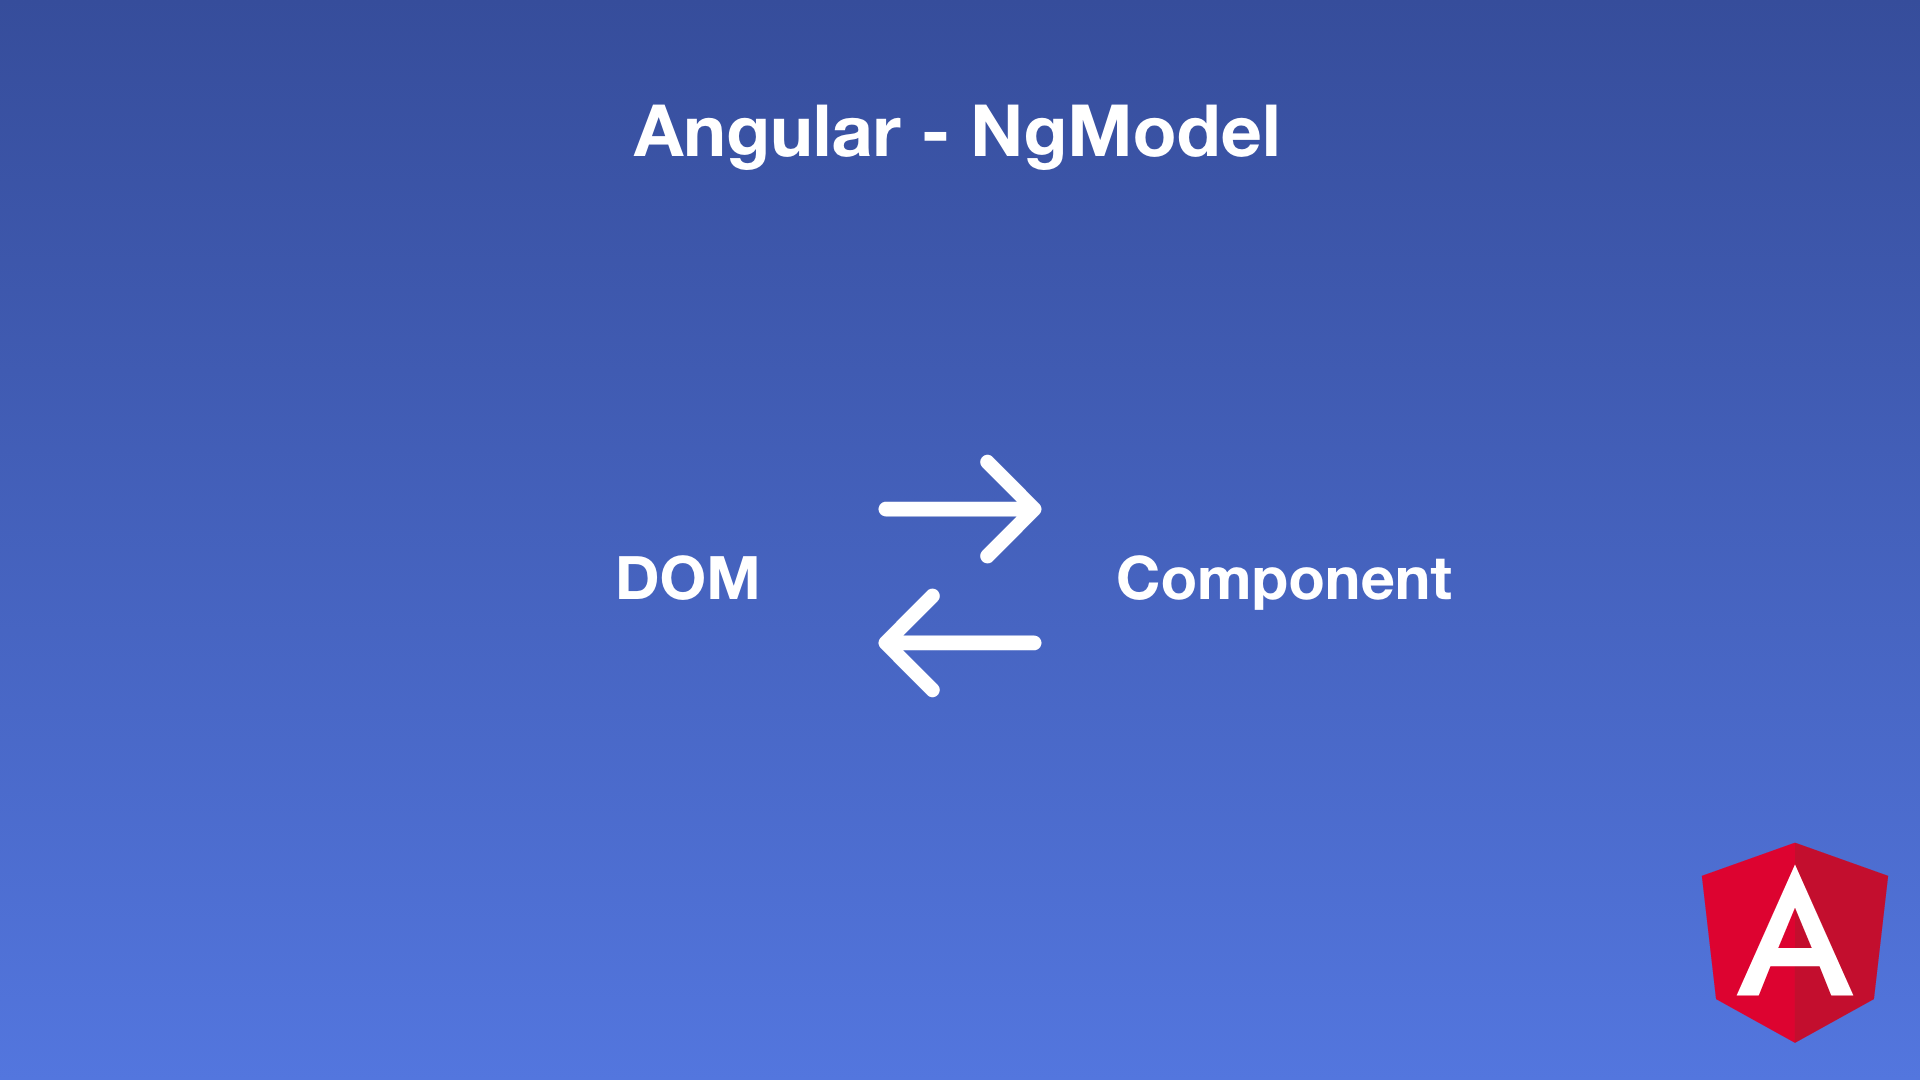 Angular - Les template-driven forms